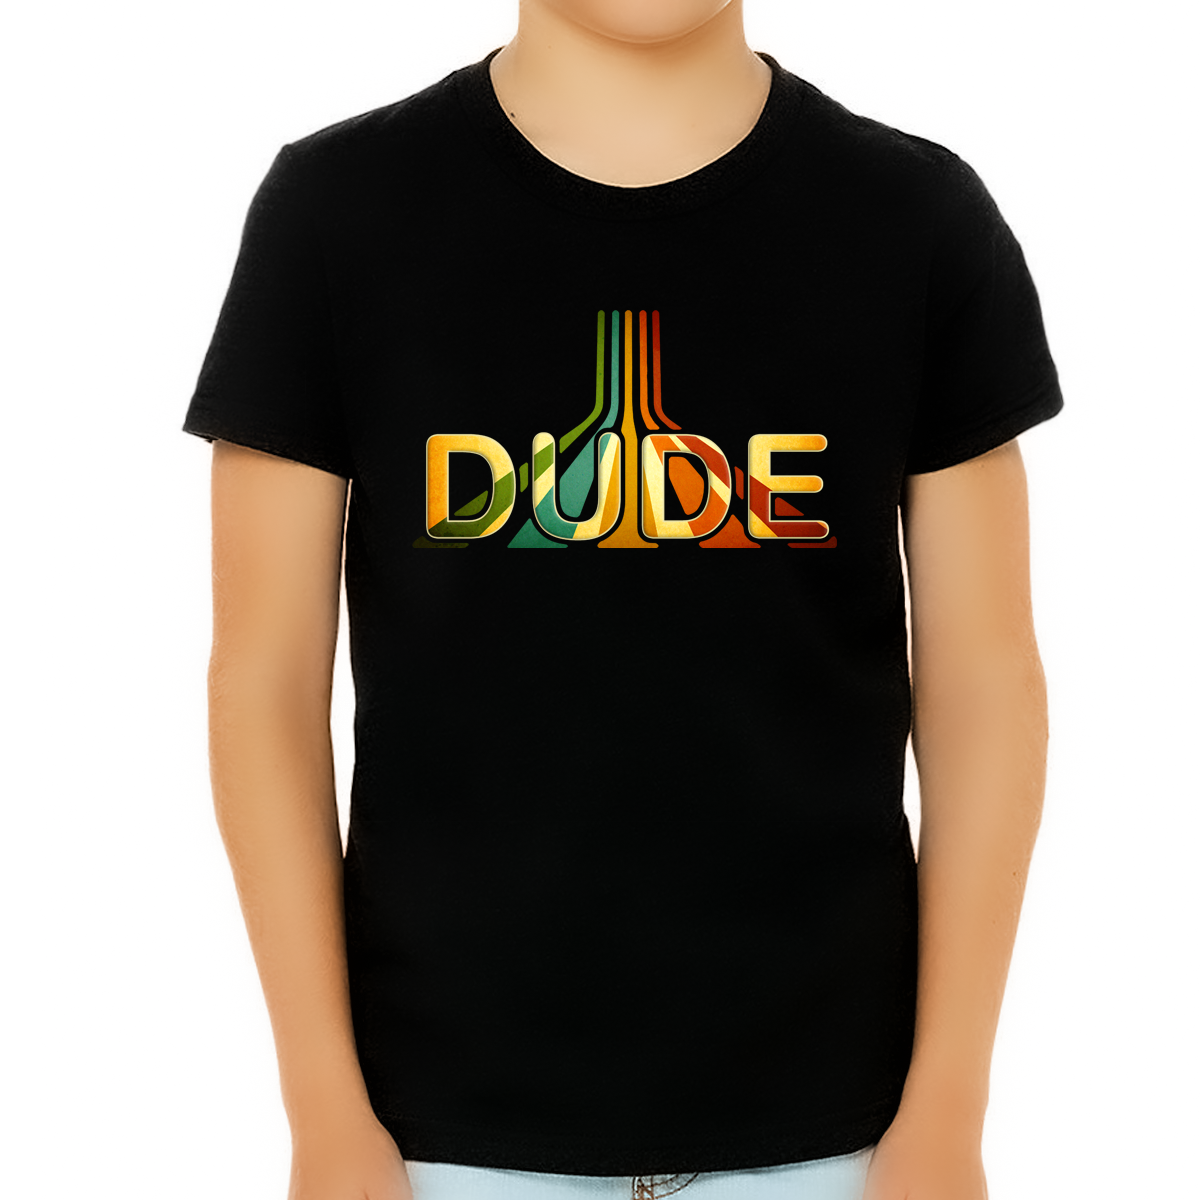 Fire Fit Designs Perfect Dude Merchandise - Perfect Dude Shirt for BOYS YOUTH KIDS - Retro Vintage Graphic Tees - Big Lebowski Shirt